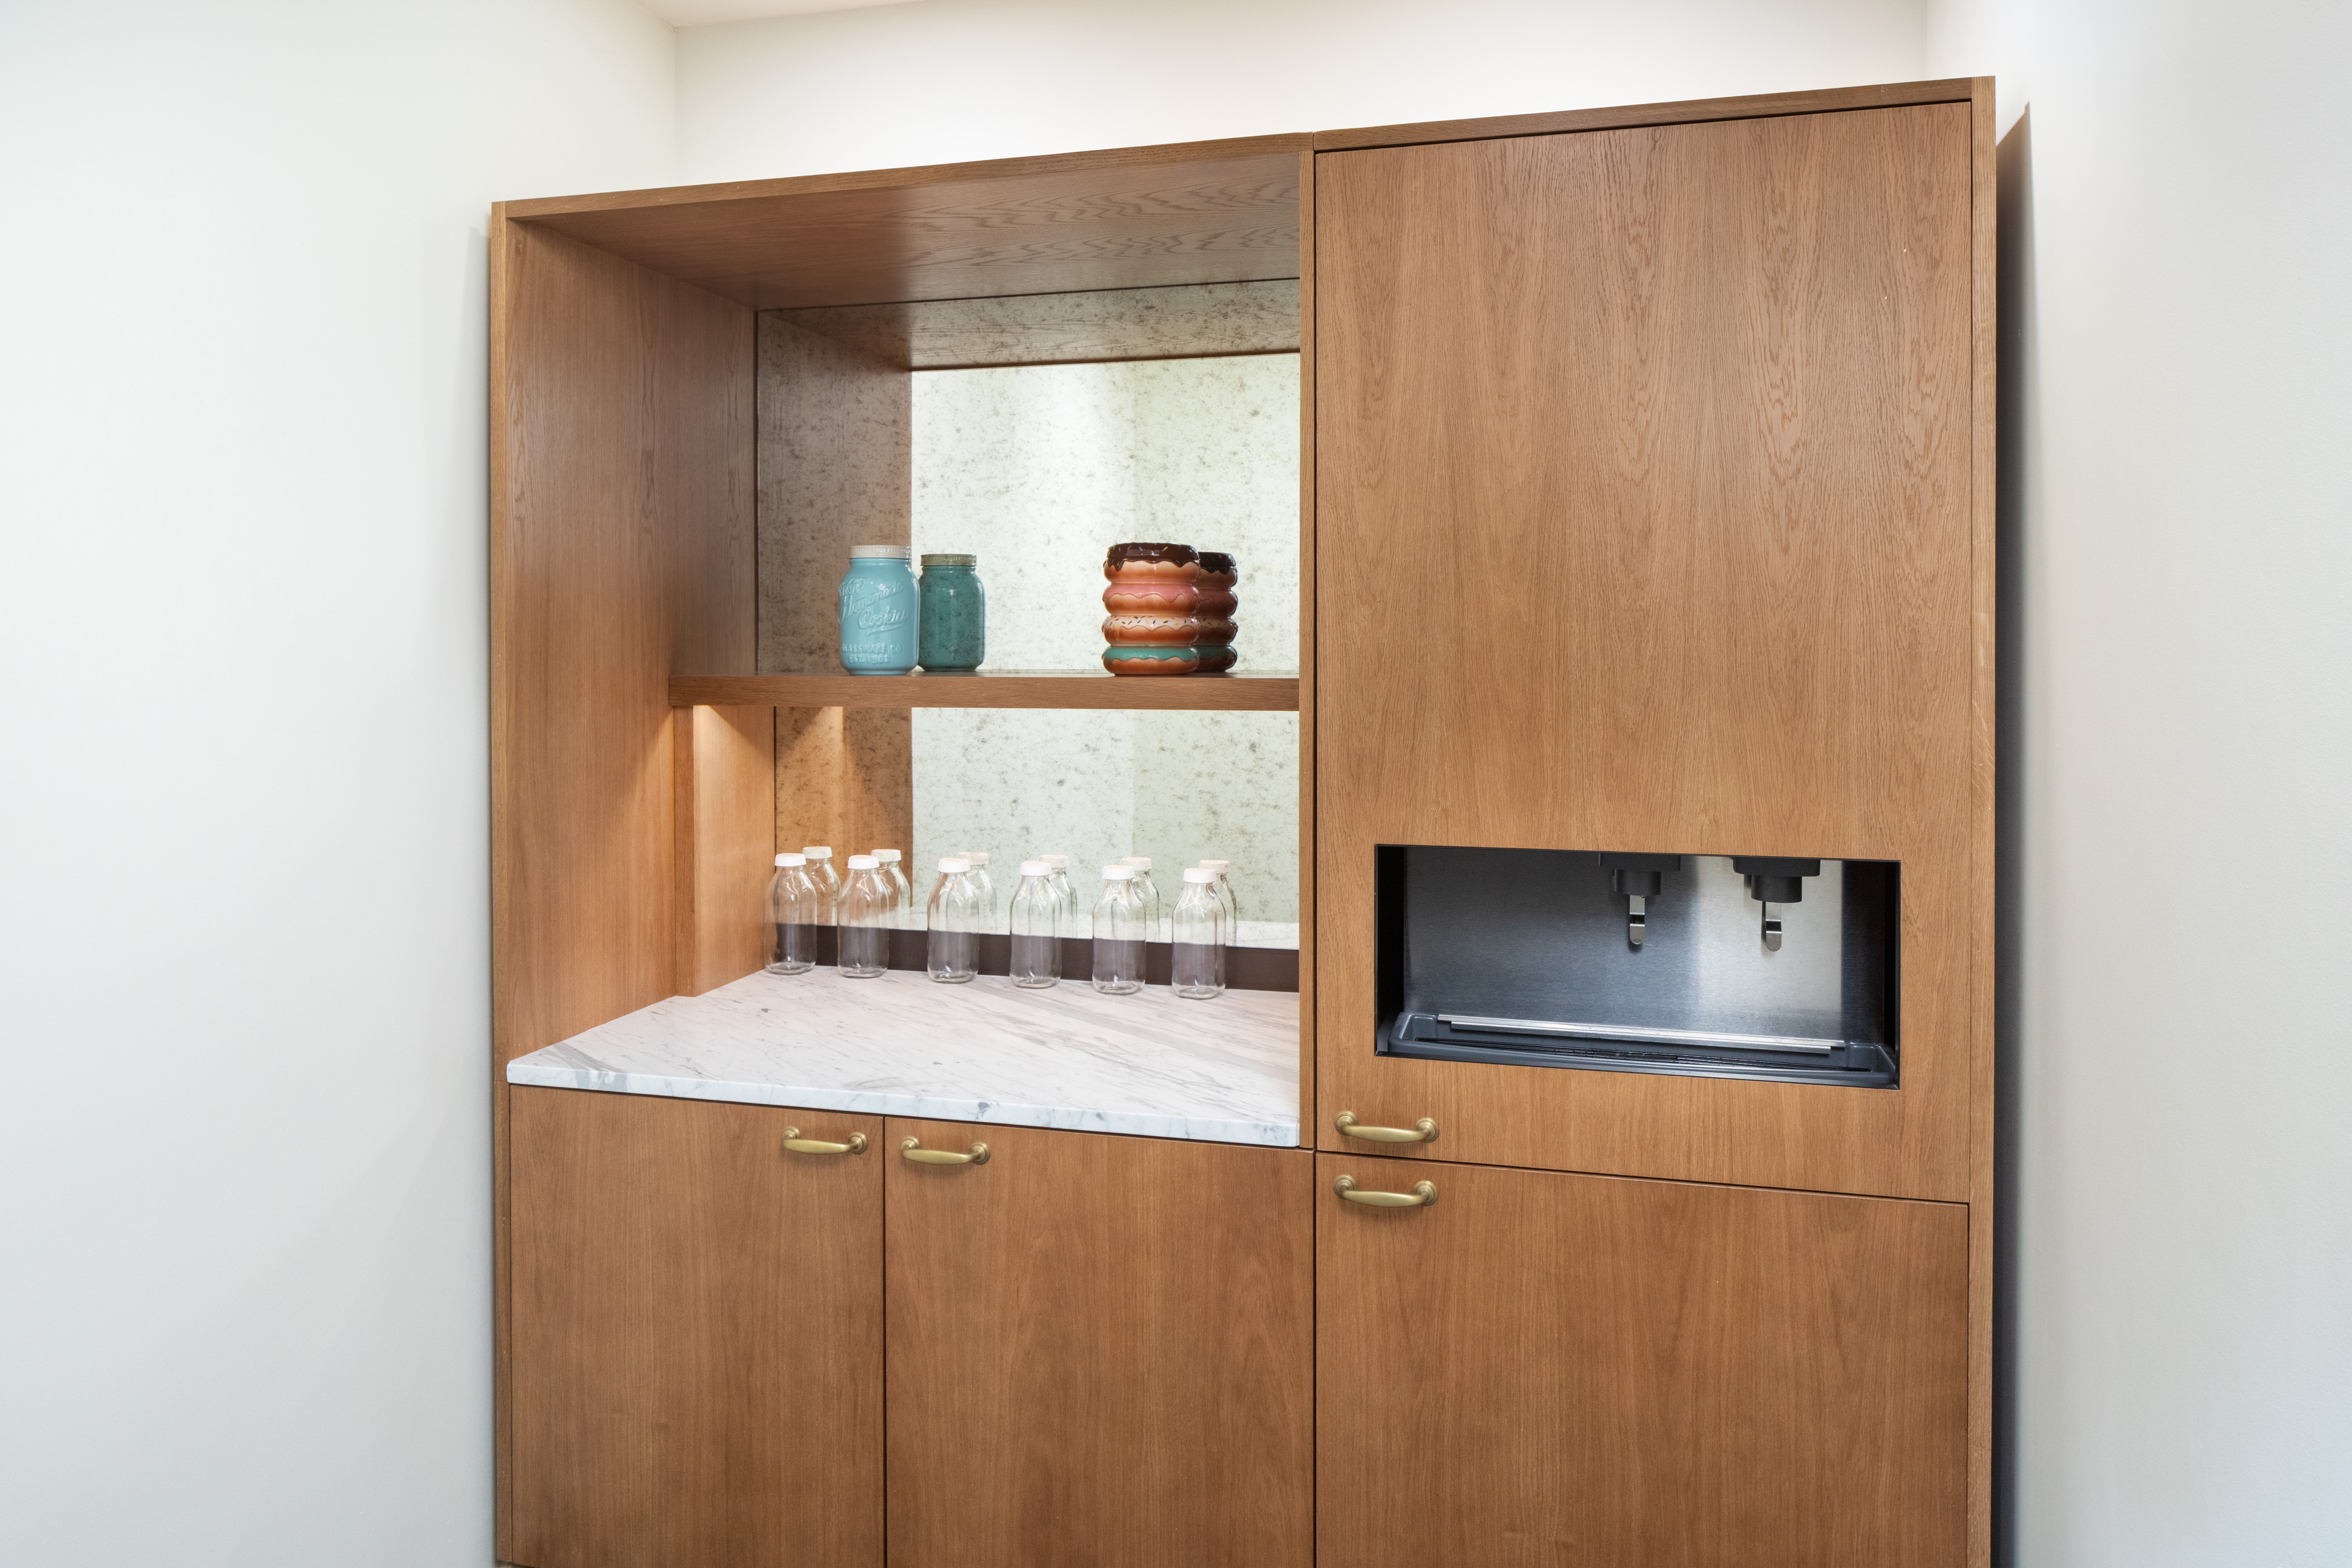 Cabinets with glasses